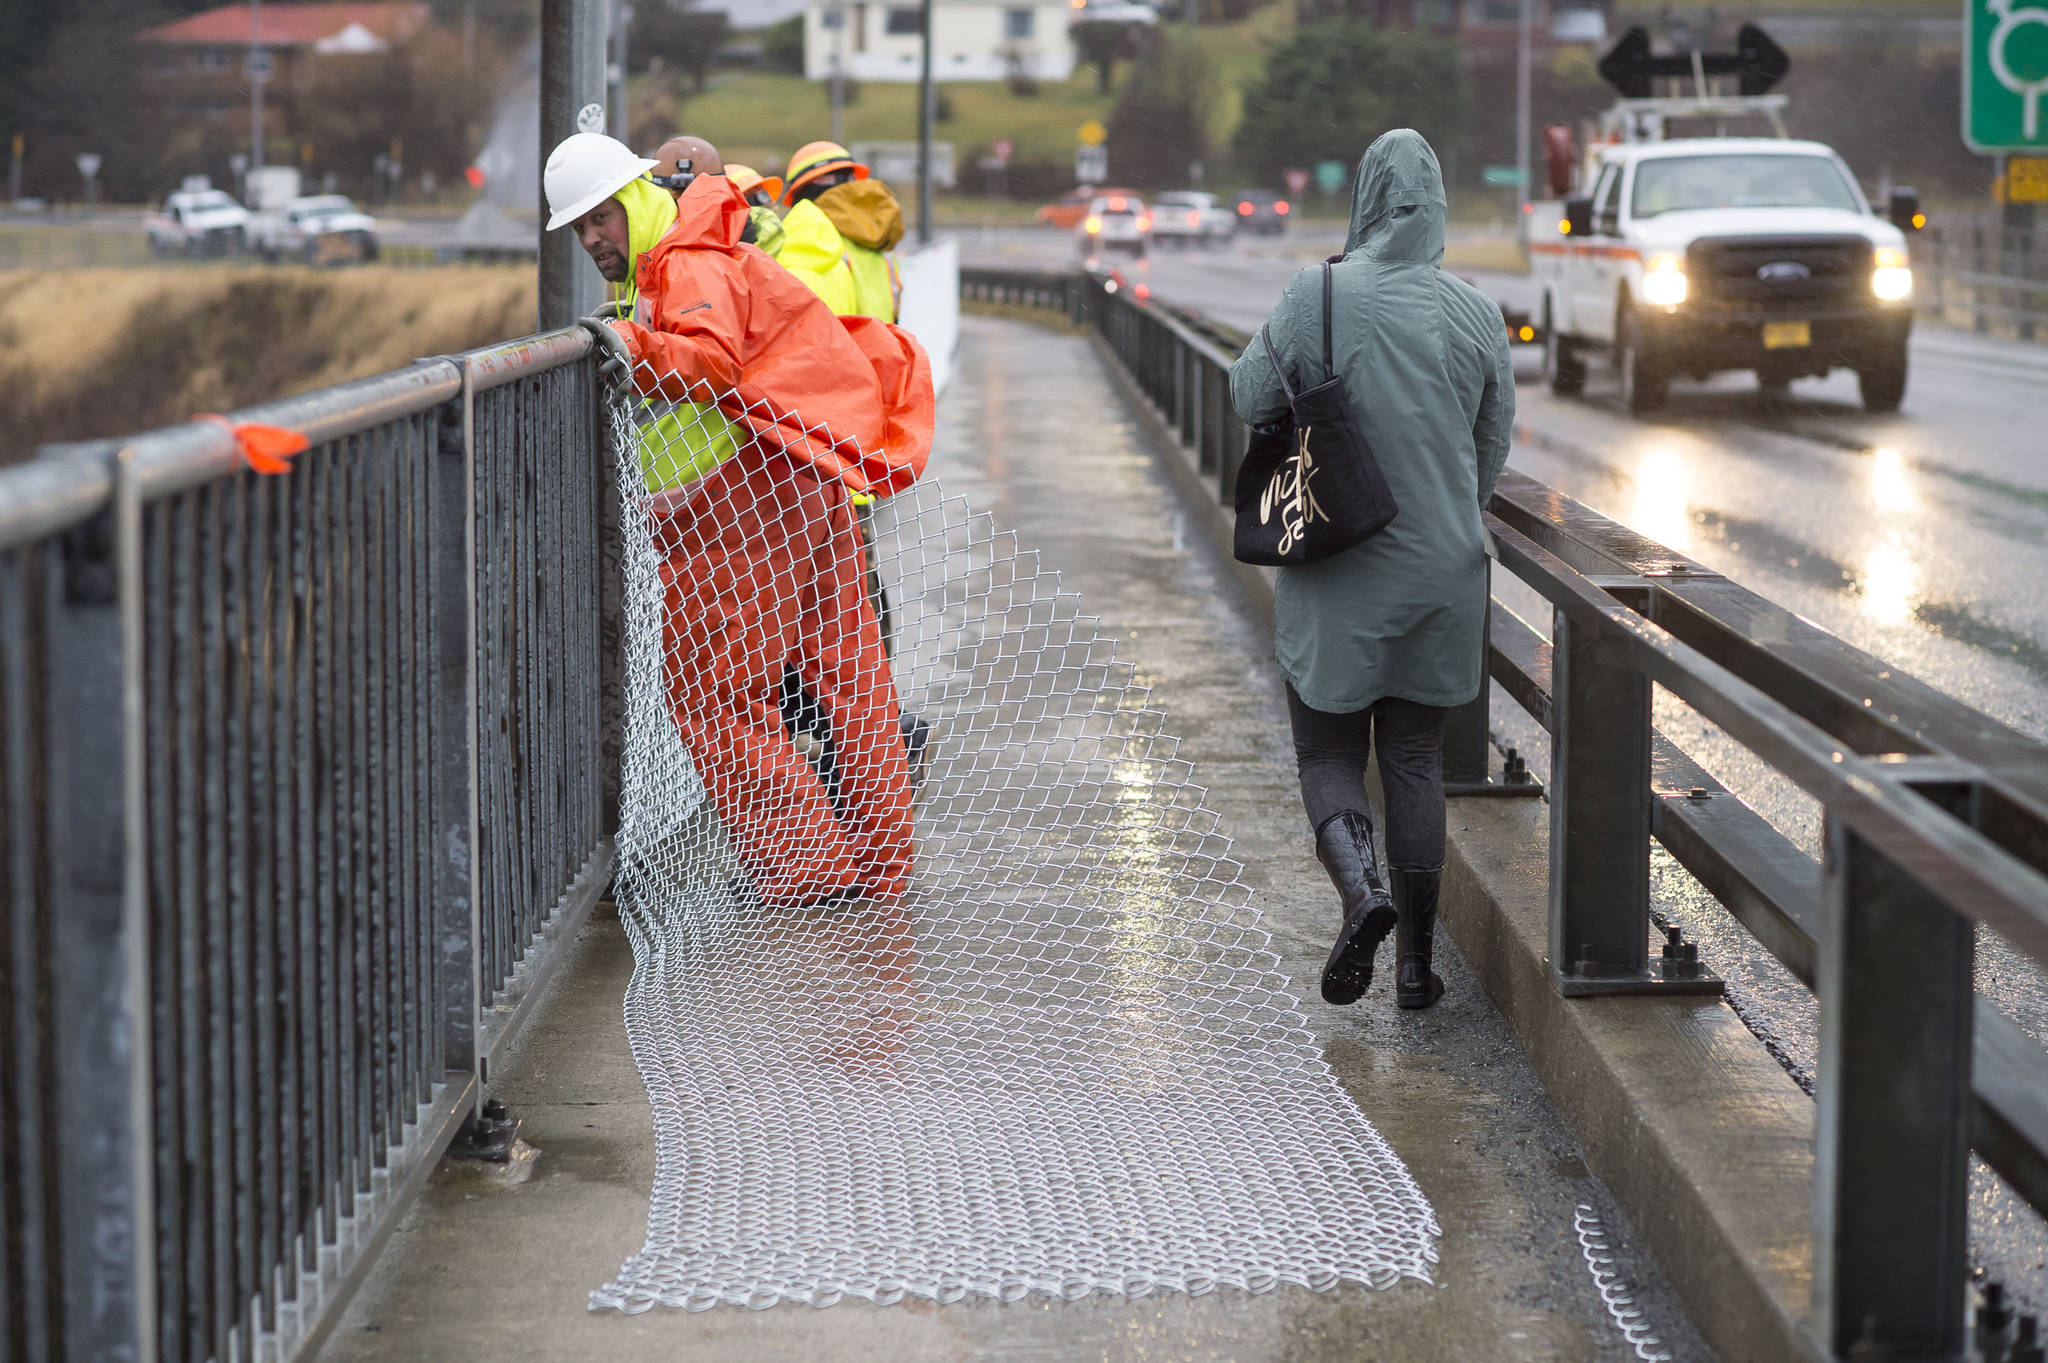 A crew from the Department of Transportation and Public Facilities installs chain-link fencing along the pedestrian walkway over the Douglas Bridge on Monday, Nov. 26, 2018. (Michael Penn | Juneau Empire)